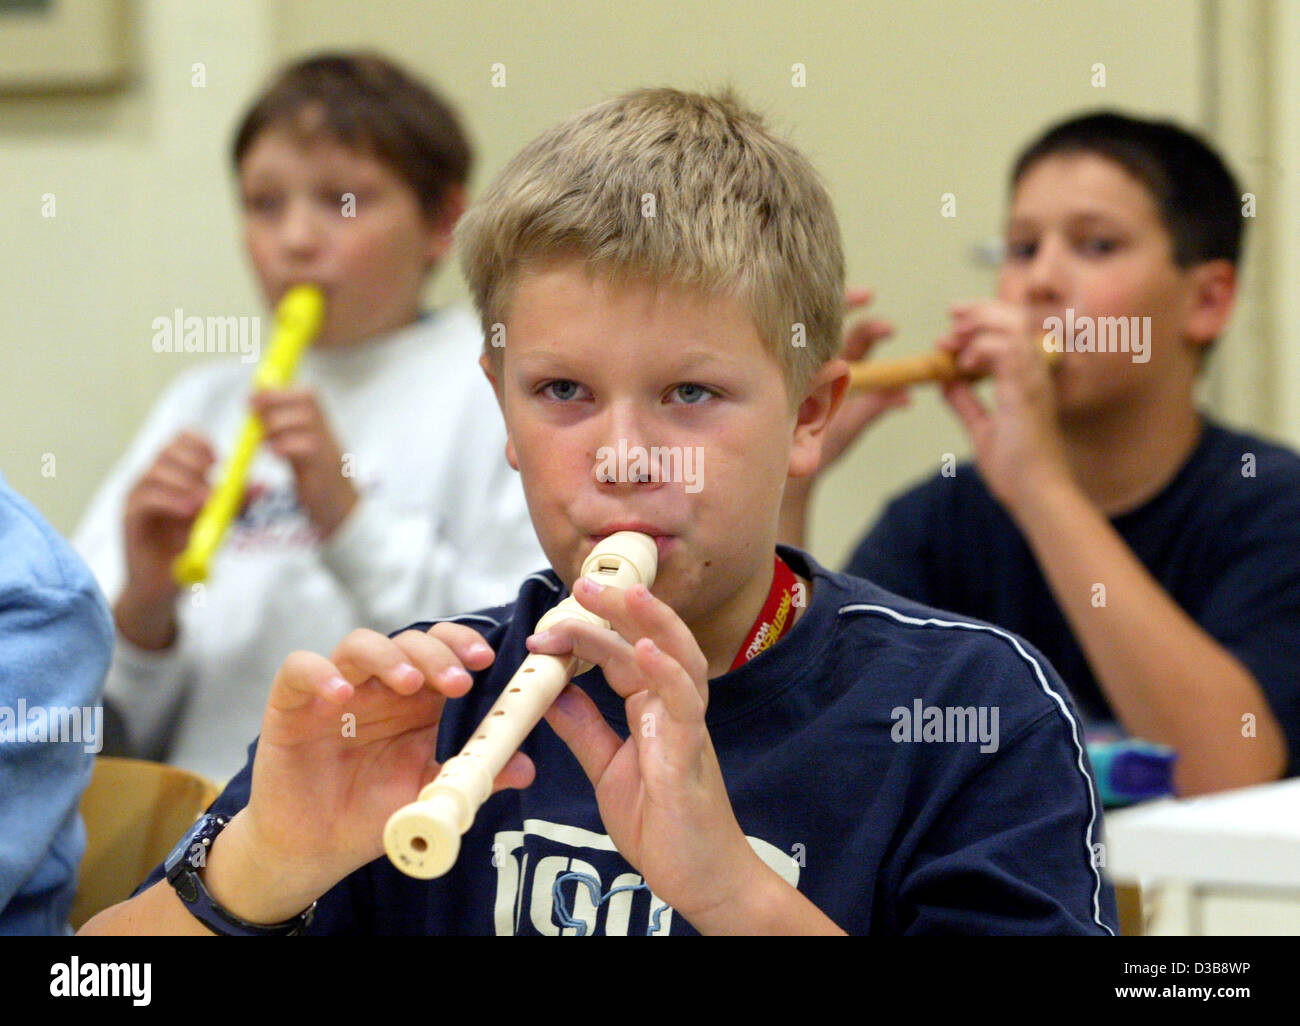 (dpa) - Students play the flute during music class at the Stauding Full-time Comprehensive School in Freiburg, Germany, 11 July 2005. The students usually attend class Mondays to Fridays from 8:00 to 16:00 and Wednesdays from 8:00 to 13:15. In addition to normal class hours the school provides assis Stock Photo